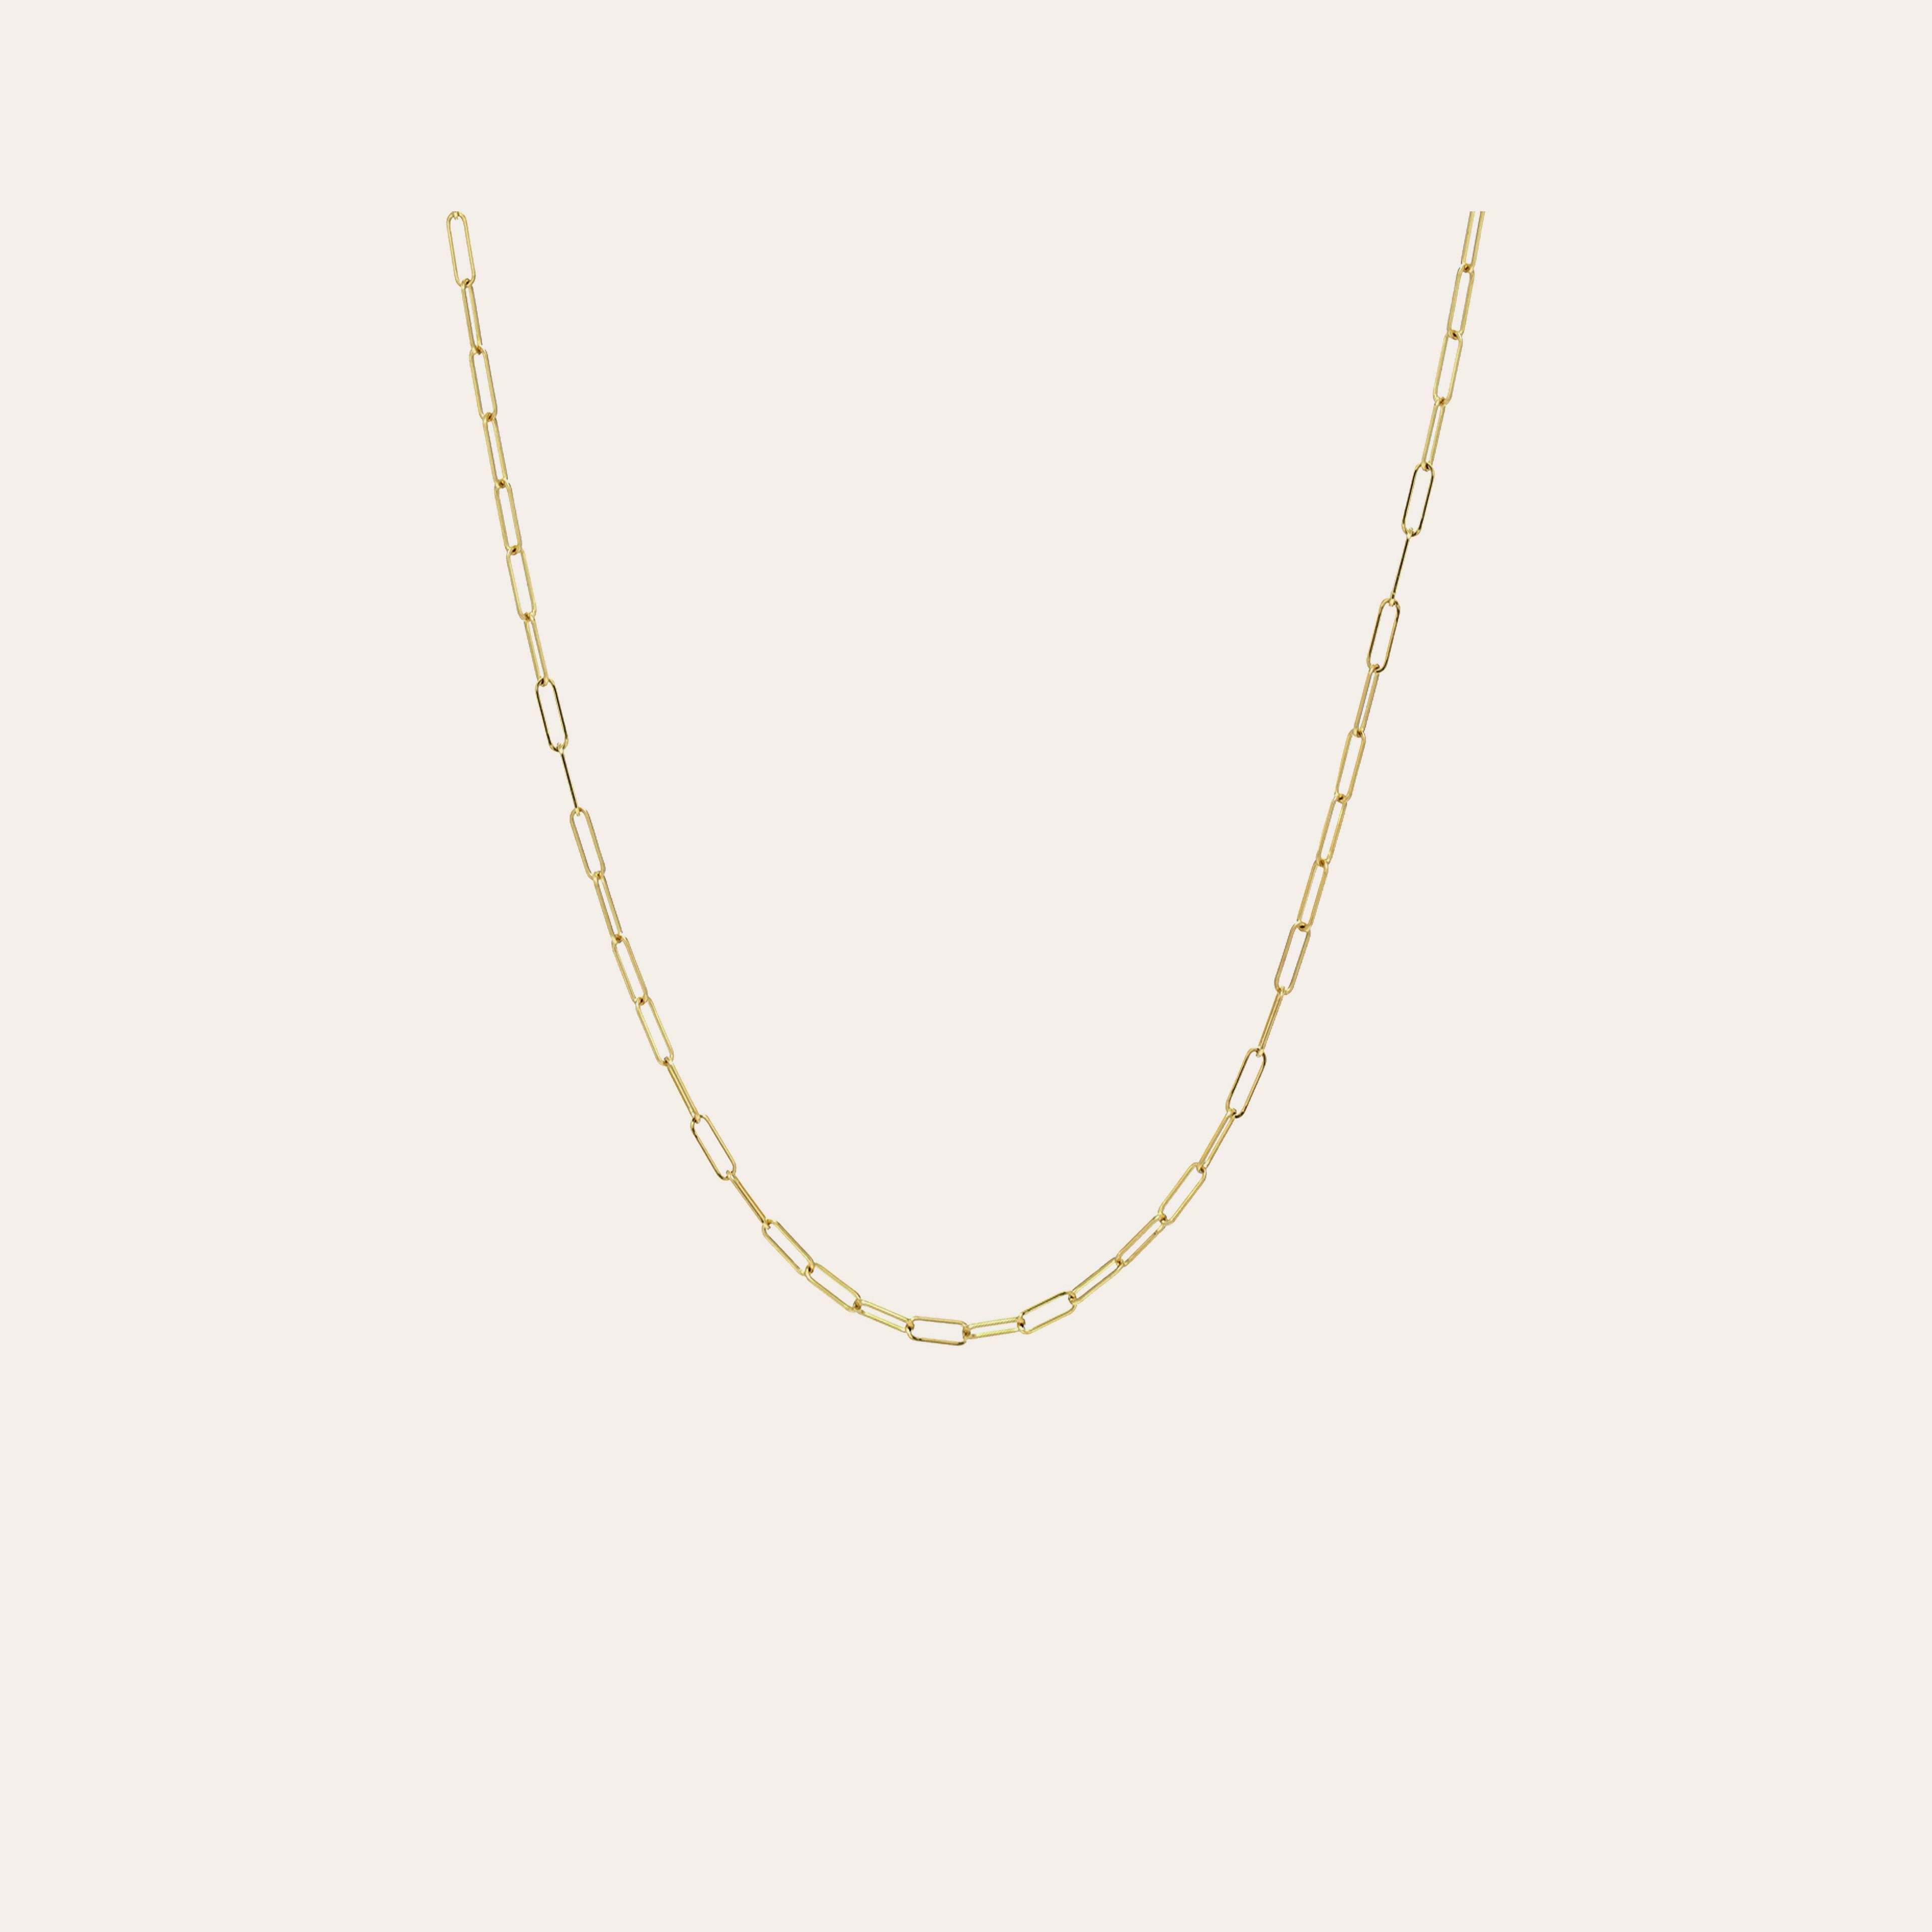 14k Gold Open Link Chain Necklace